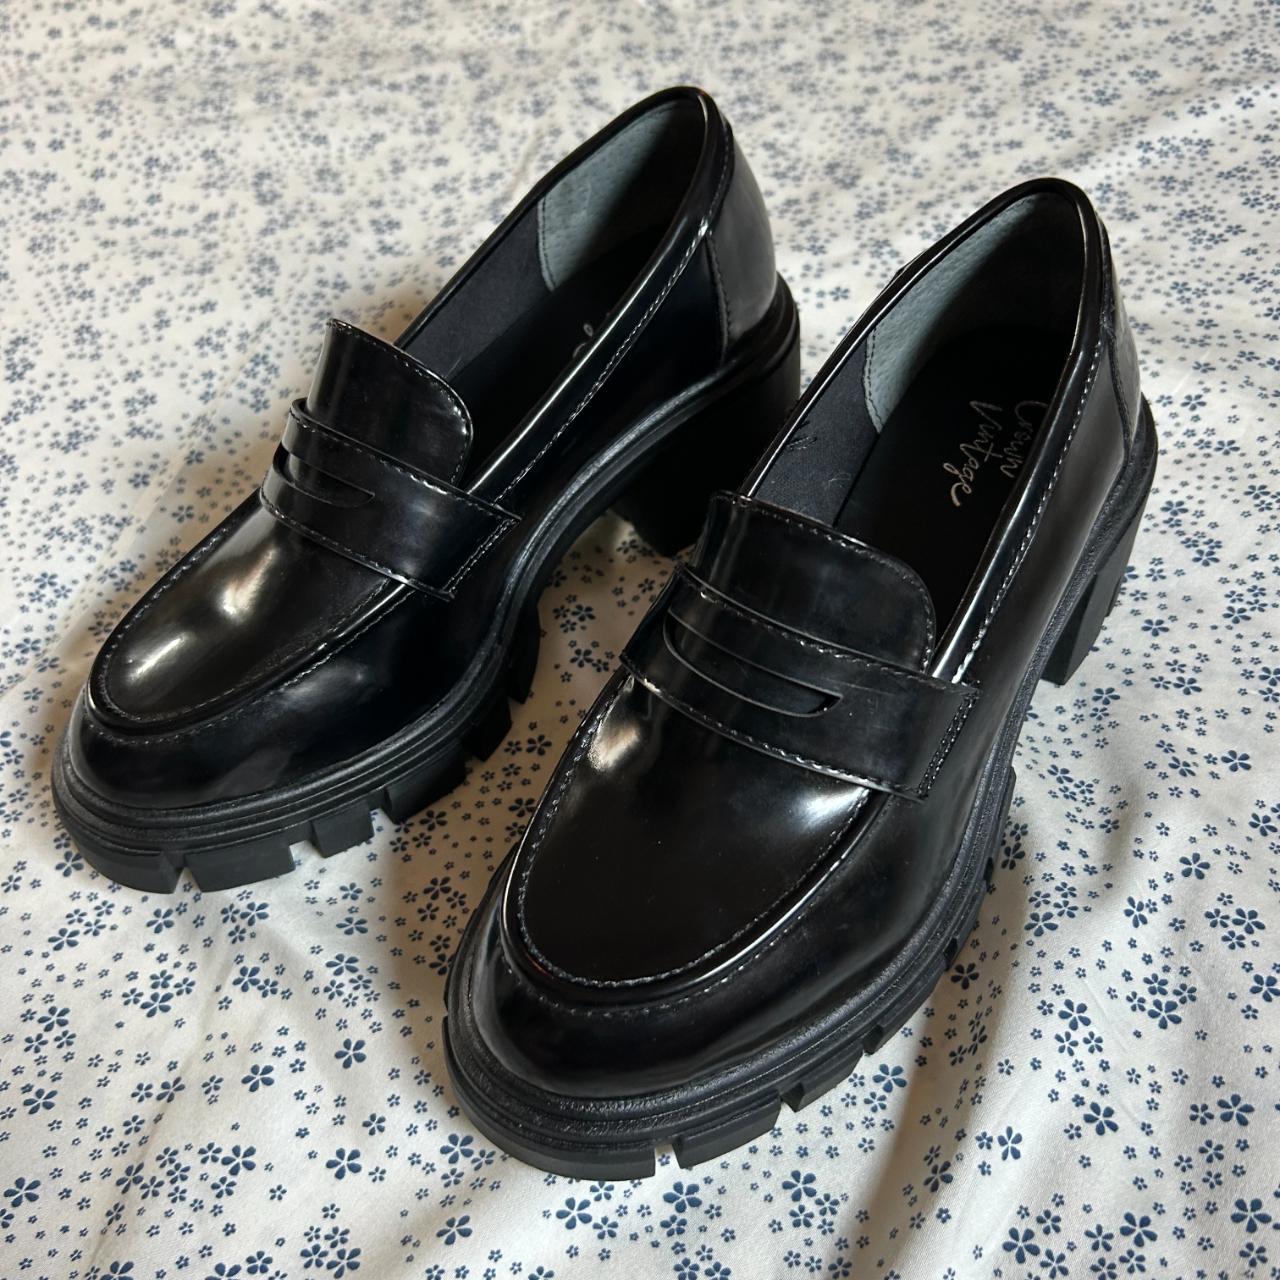 Brand new crown vintage black leather loafers with a... - Depop